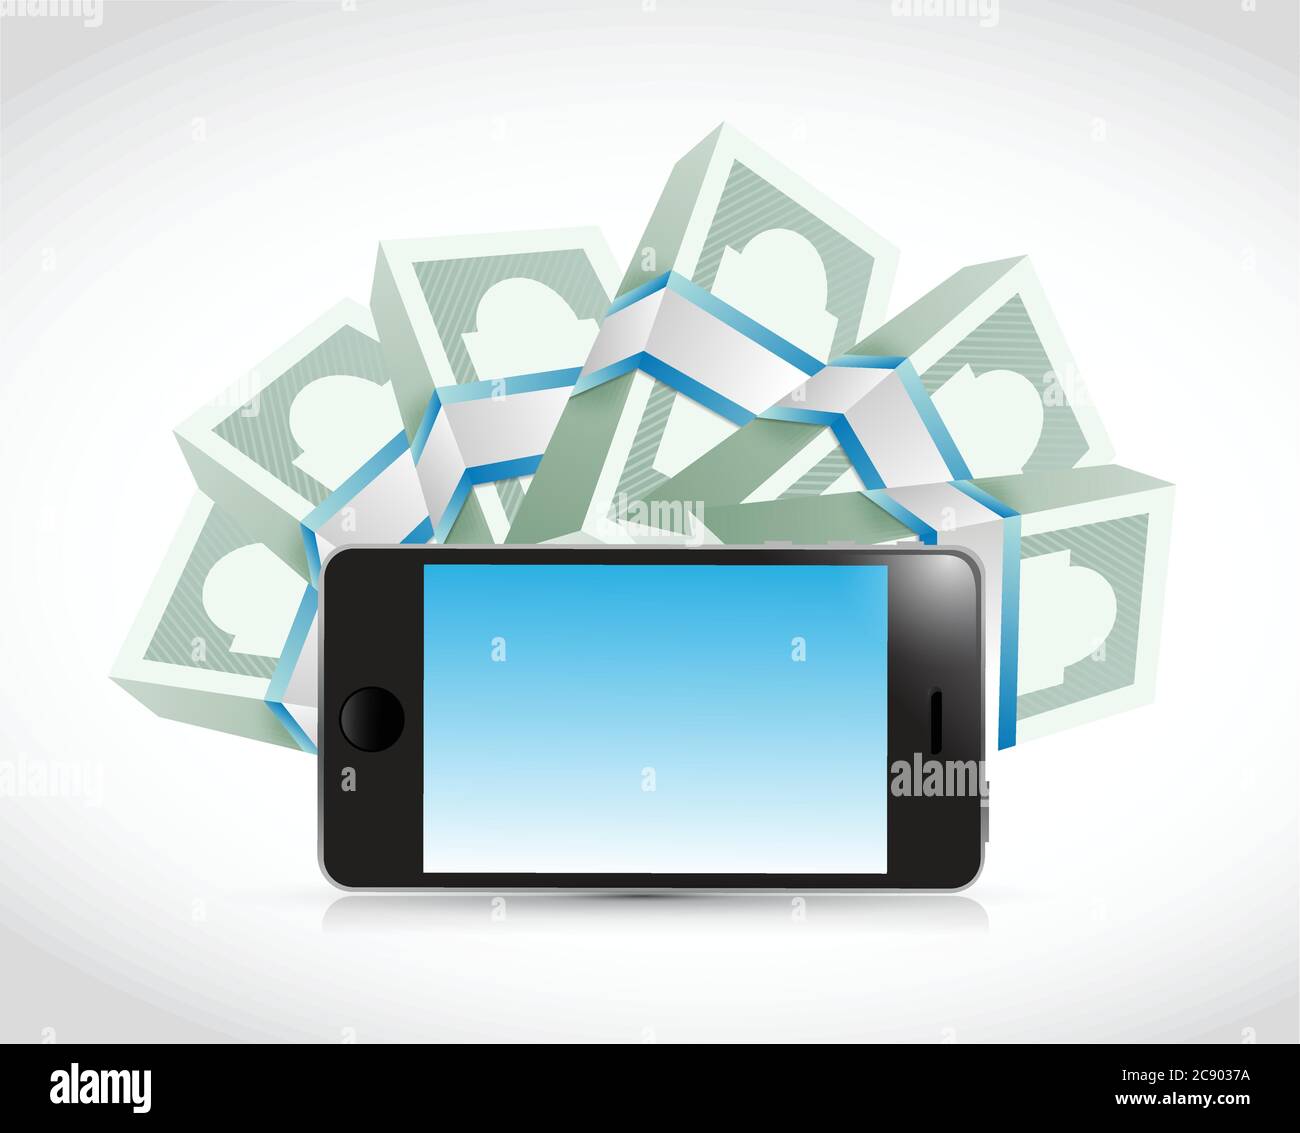 Smartphone and money around. illustration design over a white background Stock Vector